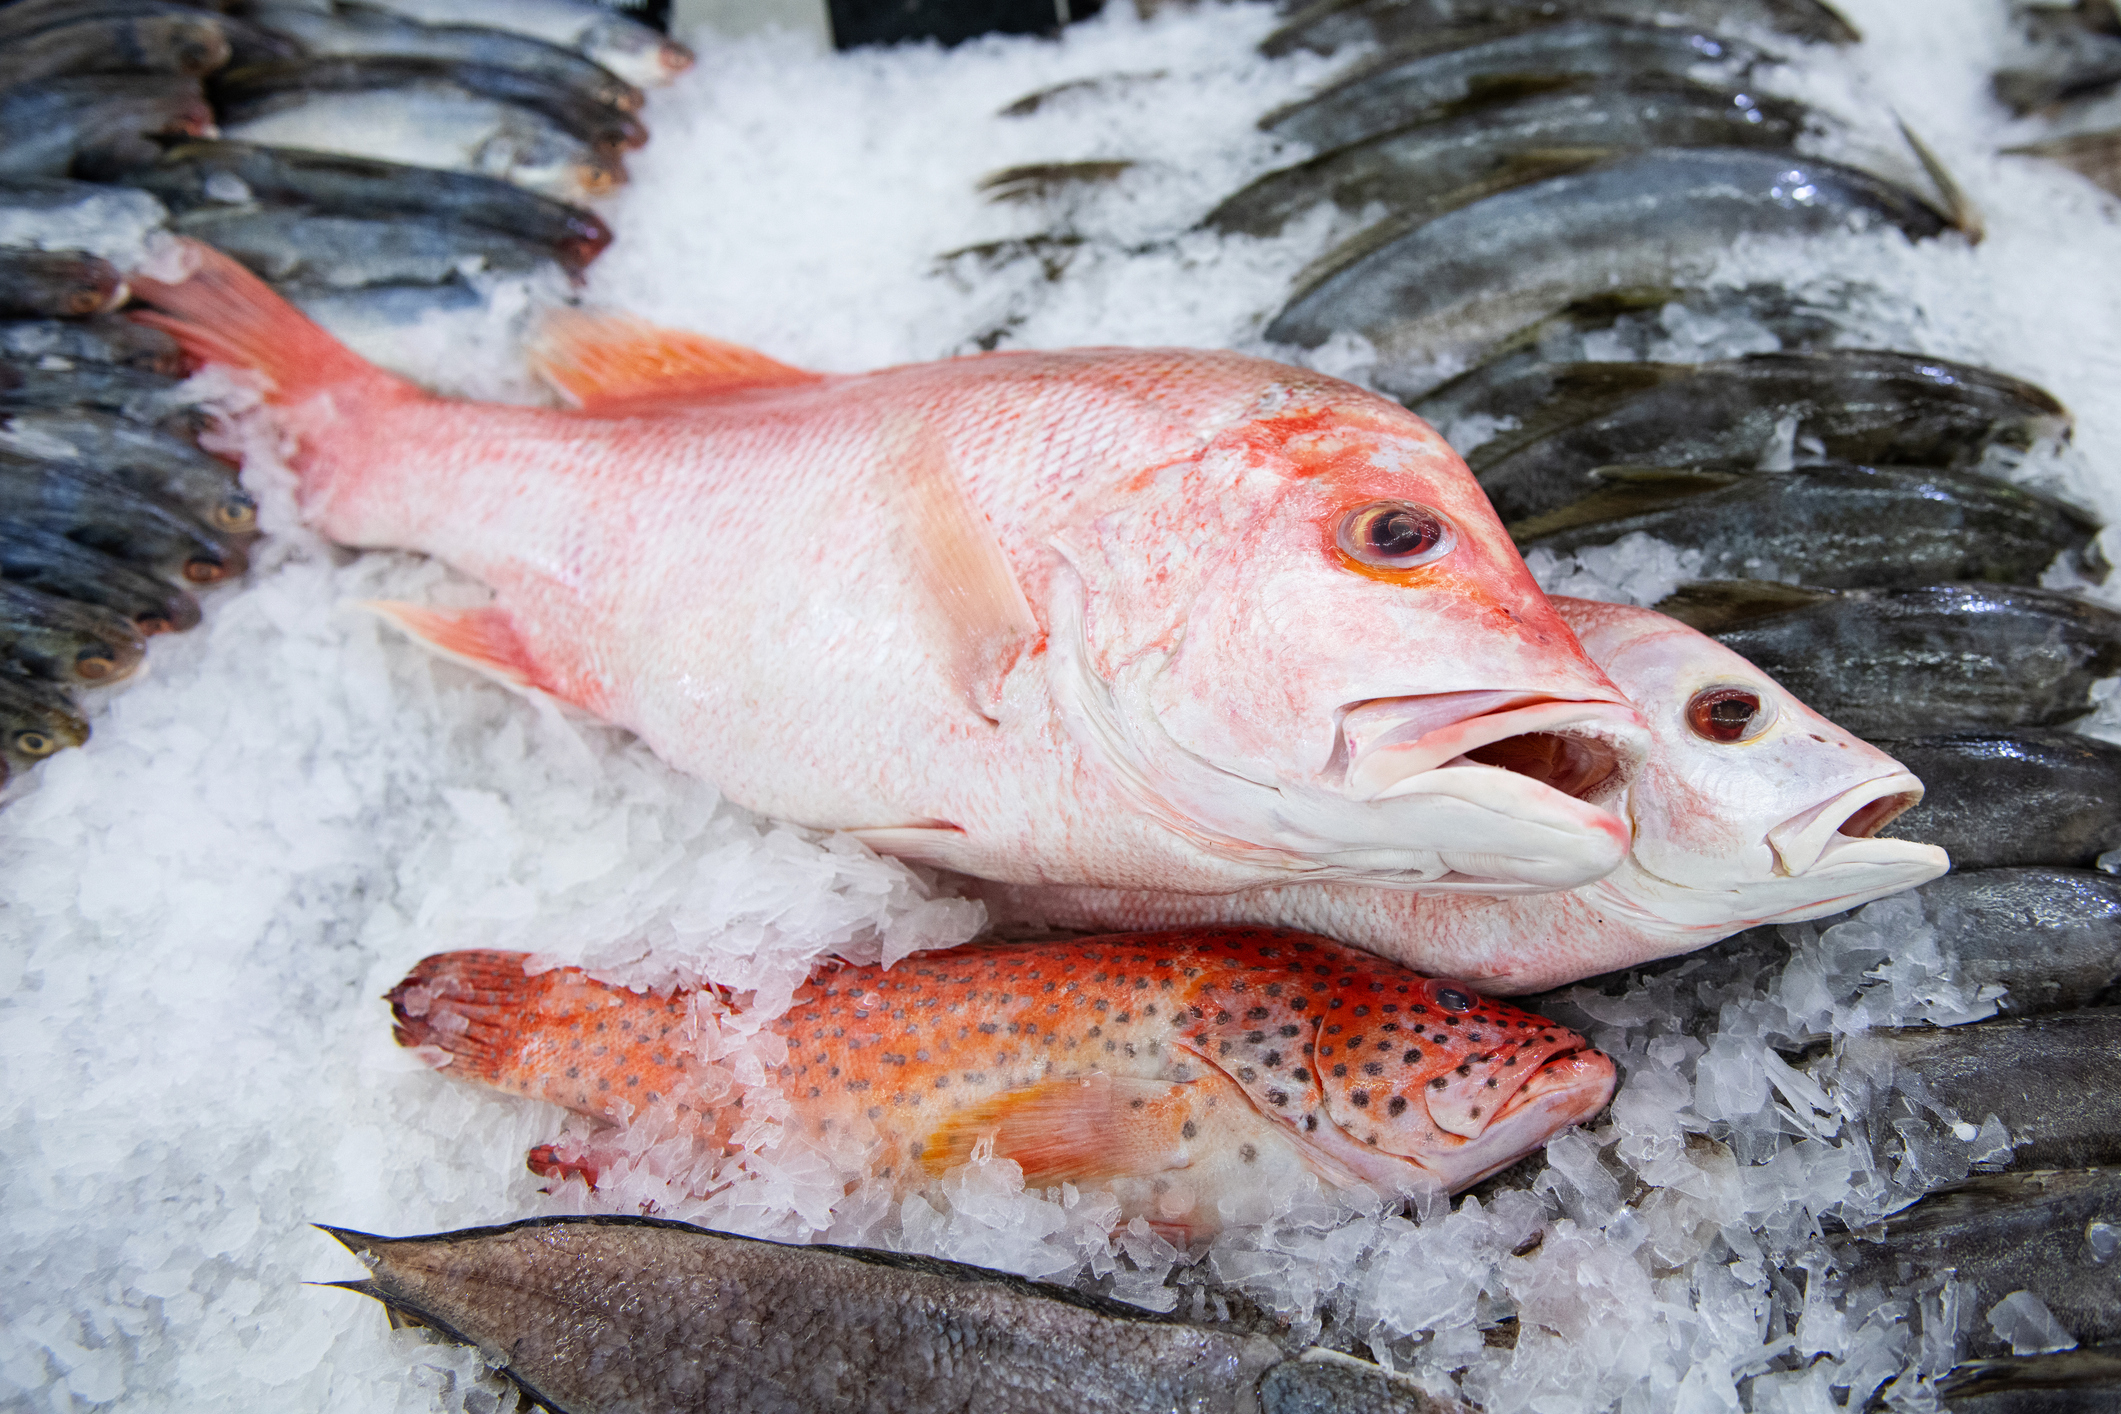 A variety of fish are on display on ice, including a large red snapper, smaller red-spotted fish, and several smaller dark fish